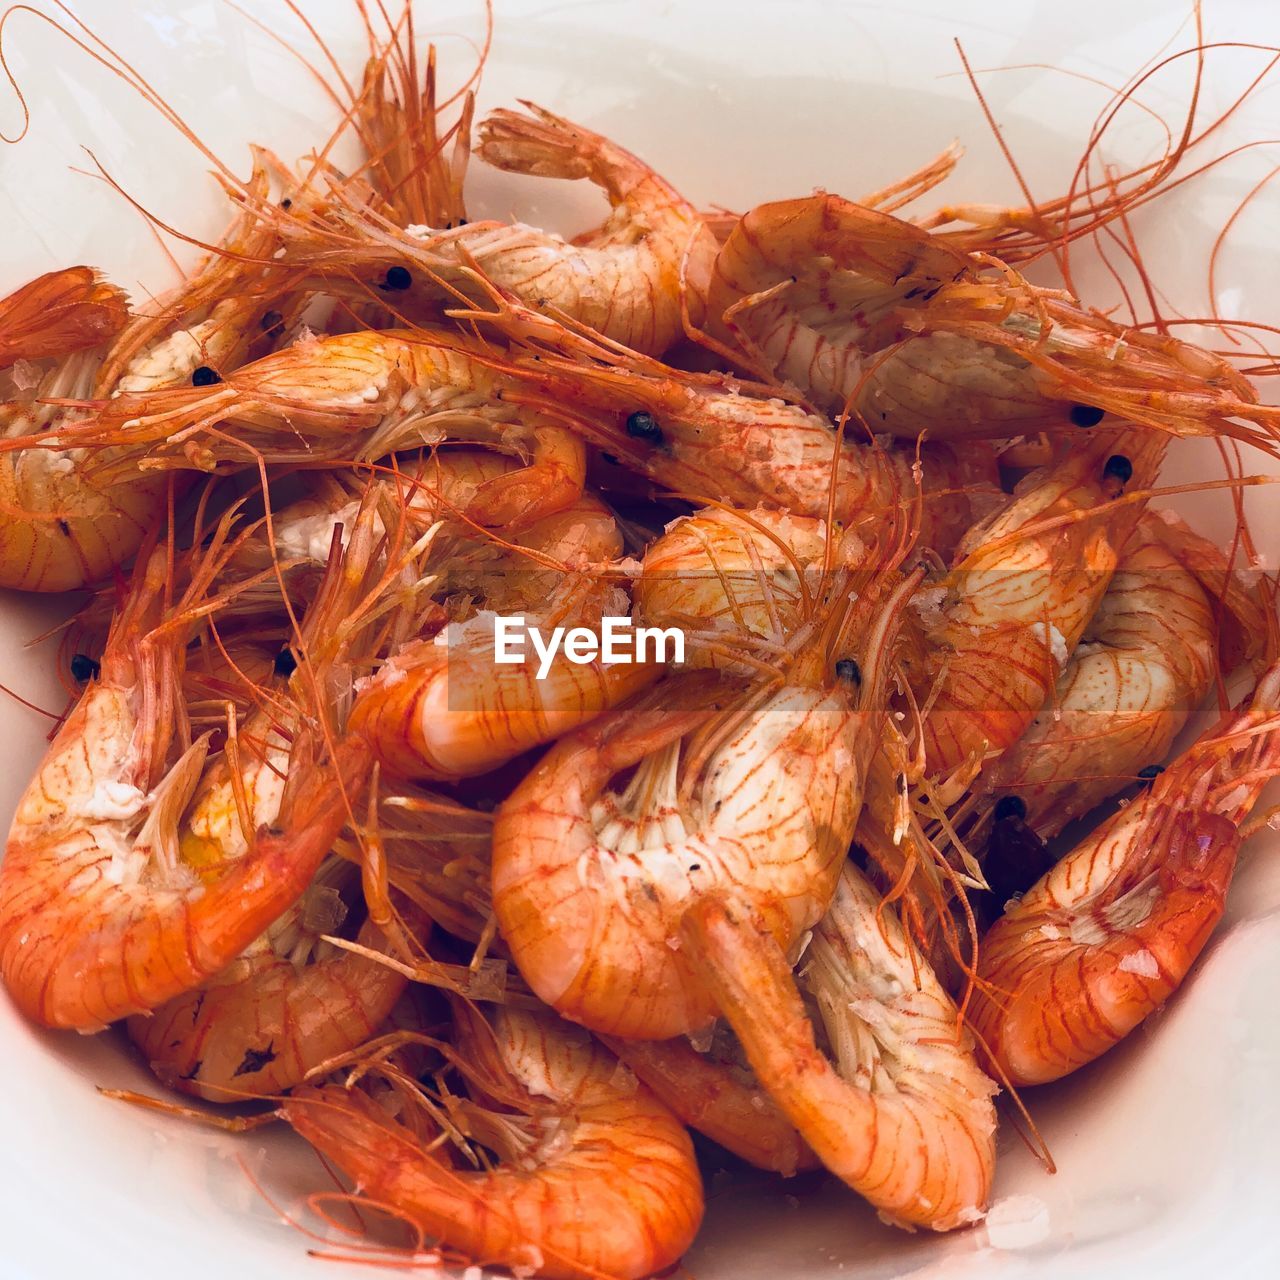 HIGH ANGLE VIEW OF PRAWNS IN PLATE